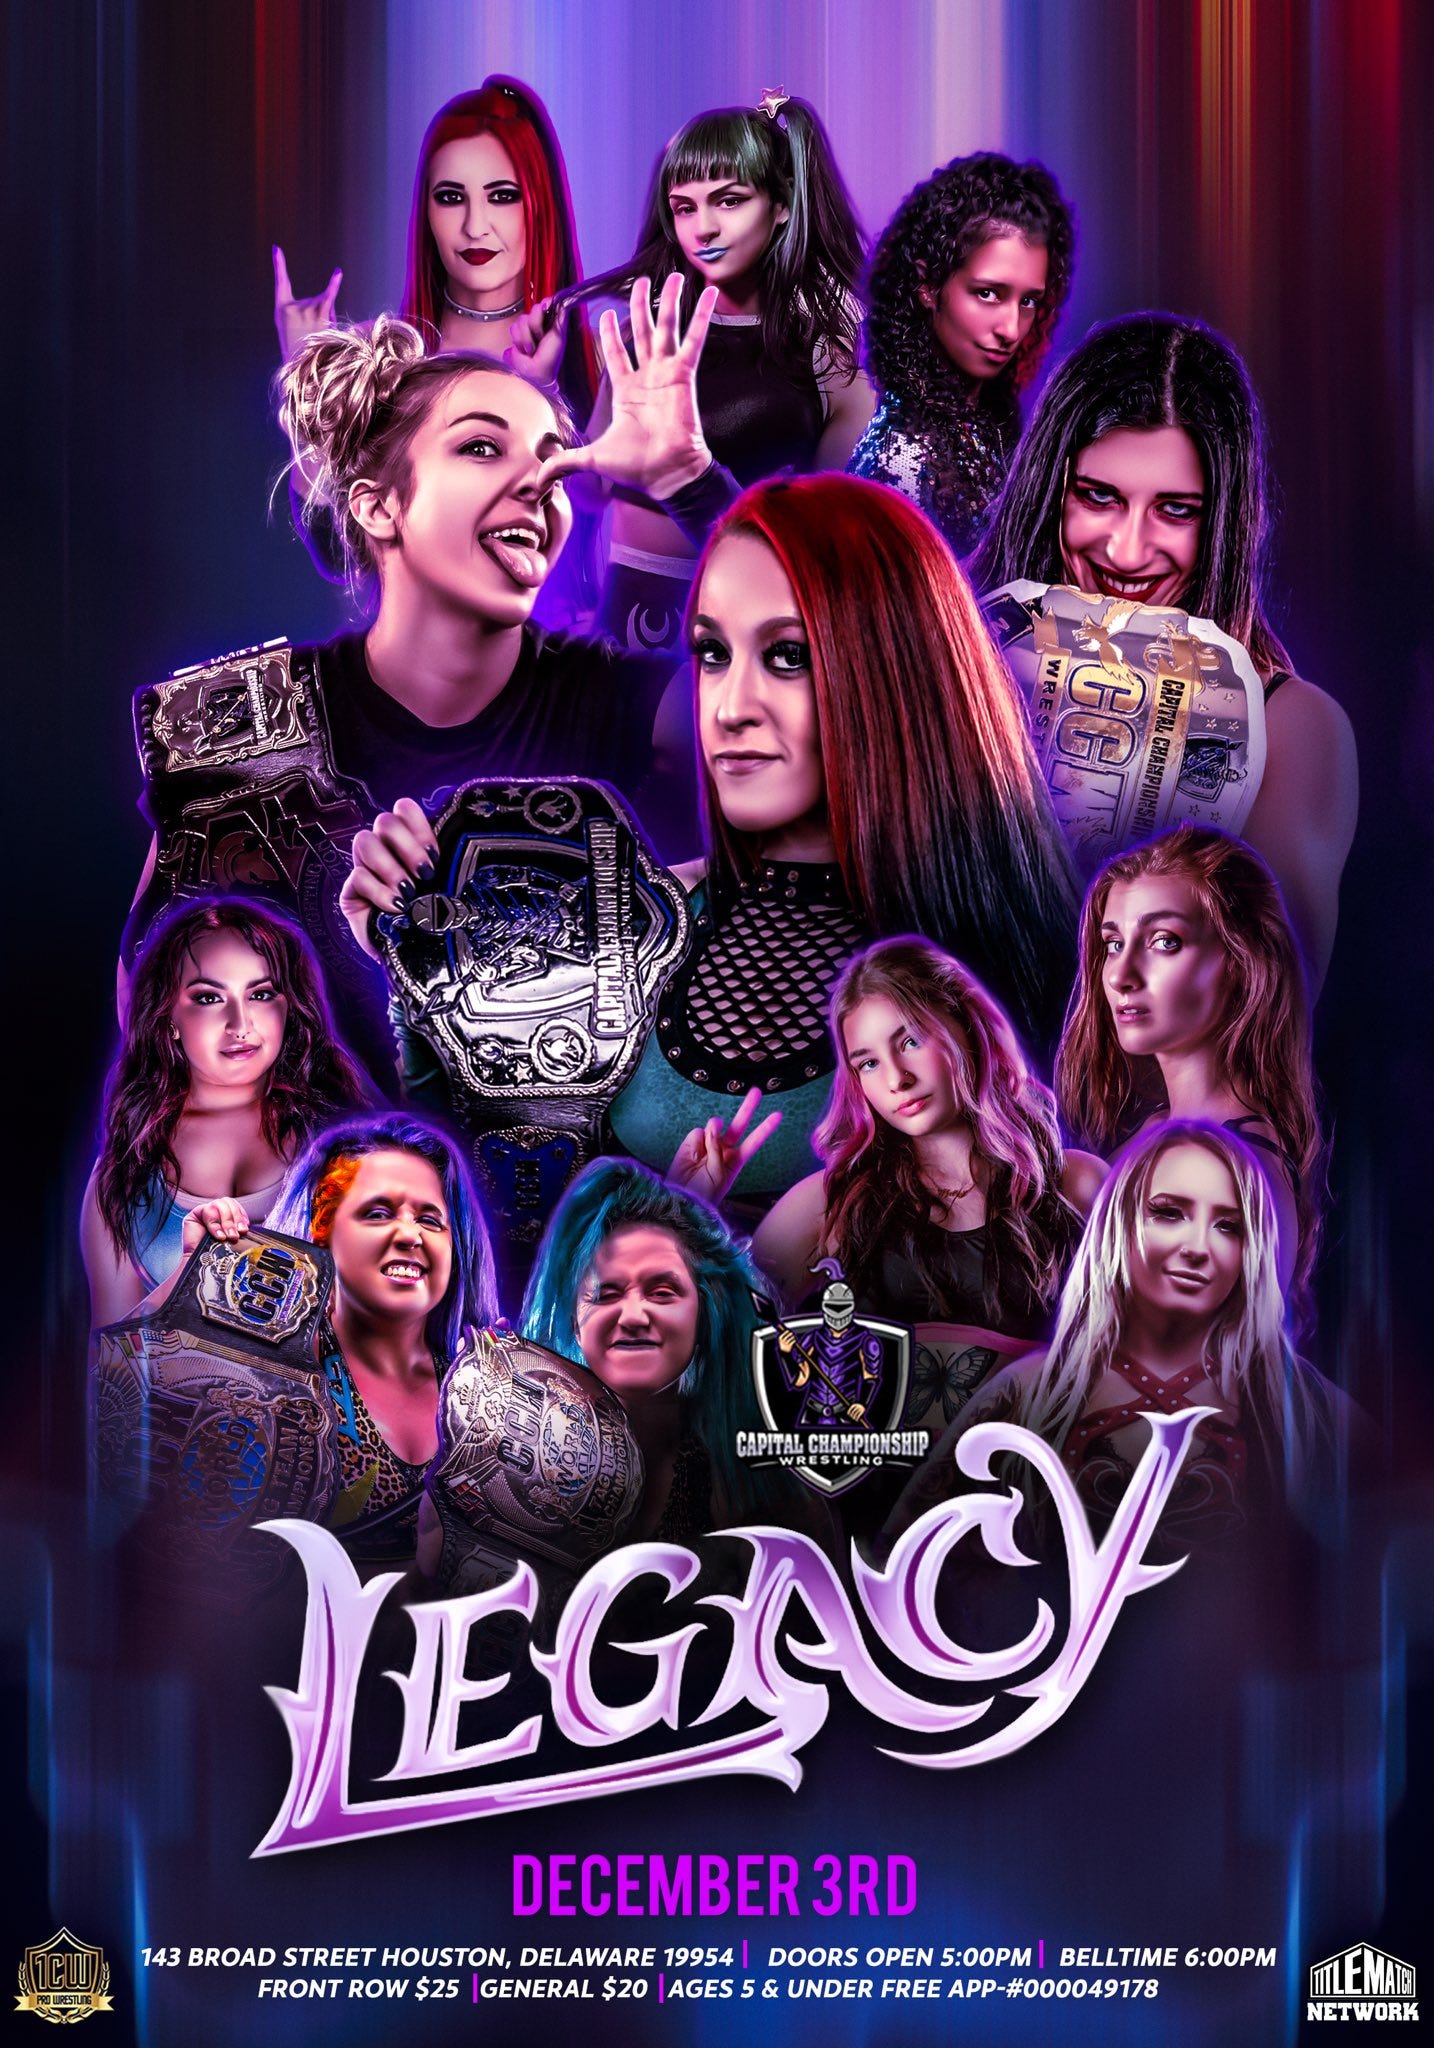 May be an image of 10 people and text that says 'จ LEGACY CAPITAL CHAMPIONSHIP DECEMBER 3RD 143 BROAD STREET HOUSTON, DELAWARE 19954 DOORS OPEN 5:00PM BELLTIME 6:00PM FRONT ROW $25 GENERAL $20 AGES & UNDER FREE APP -#000049178 IILEMAIG NETWORK'